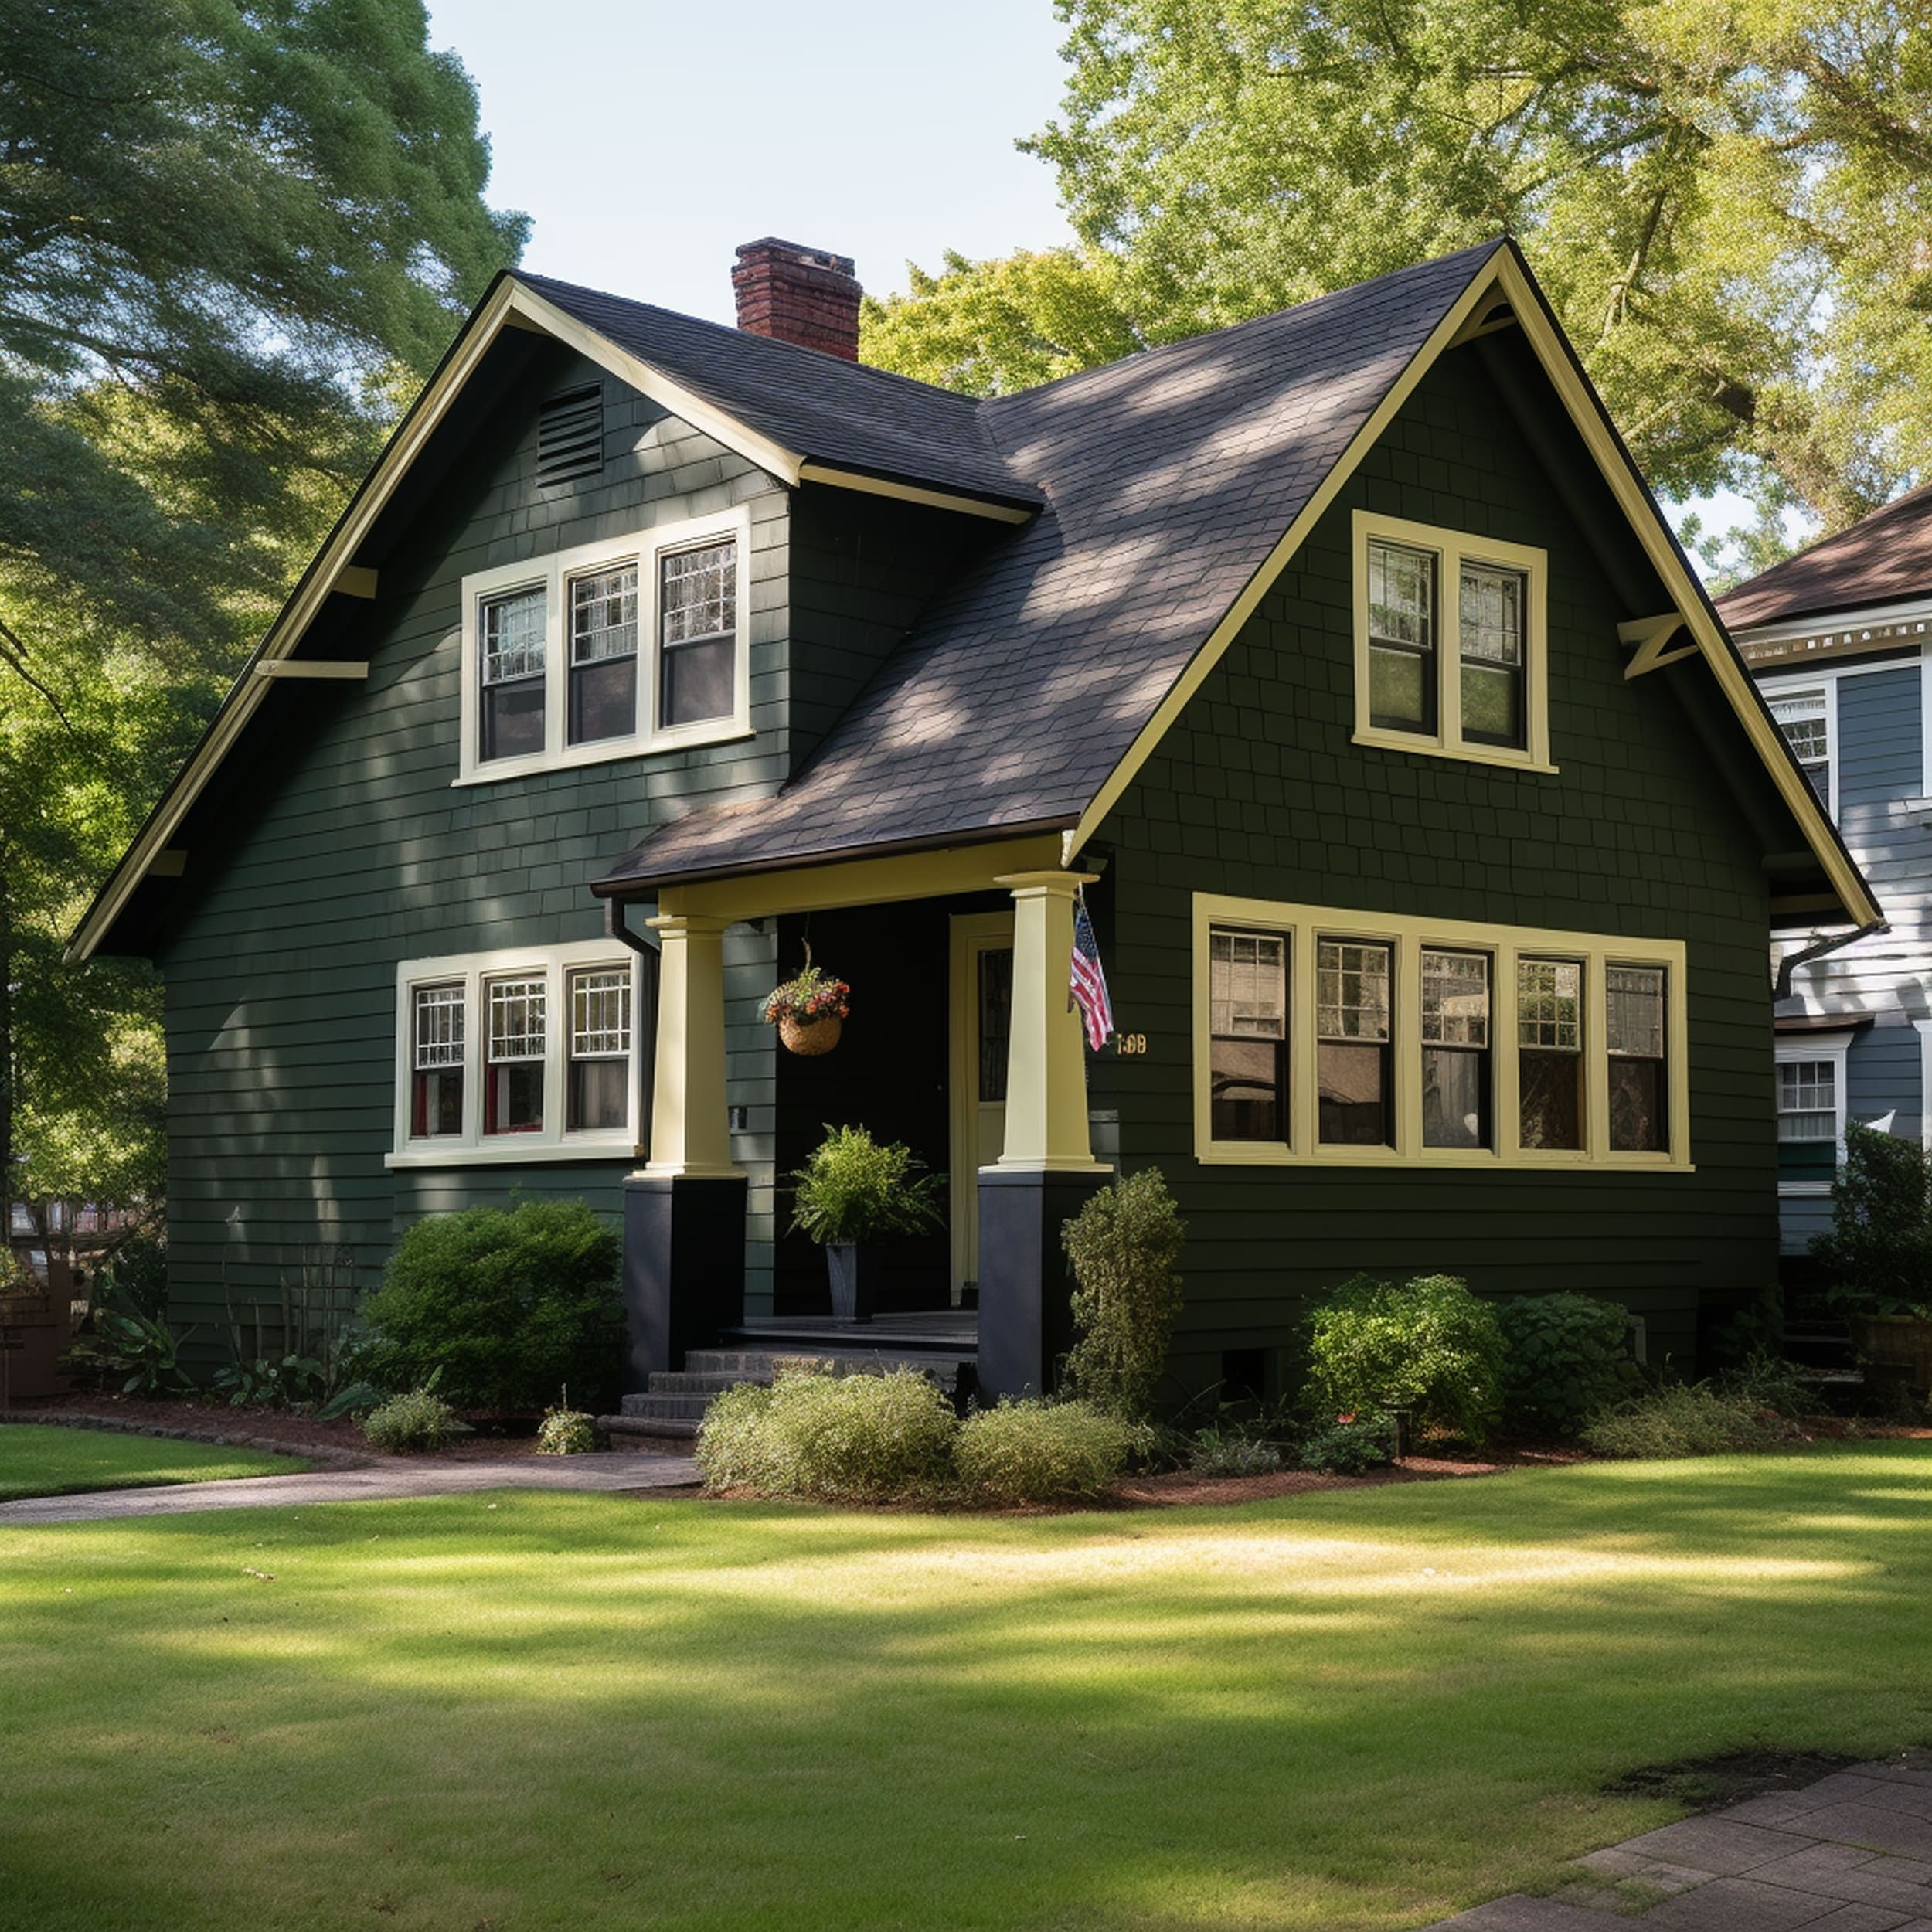 A Craftsman House With a Black Roof and Olive Green Siding